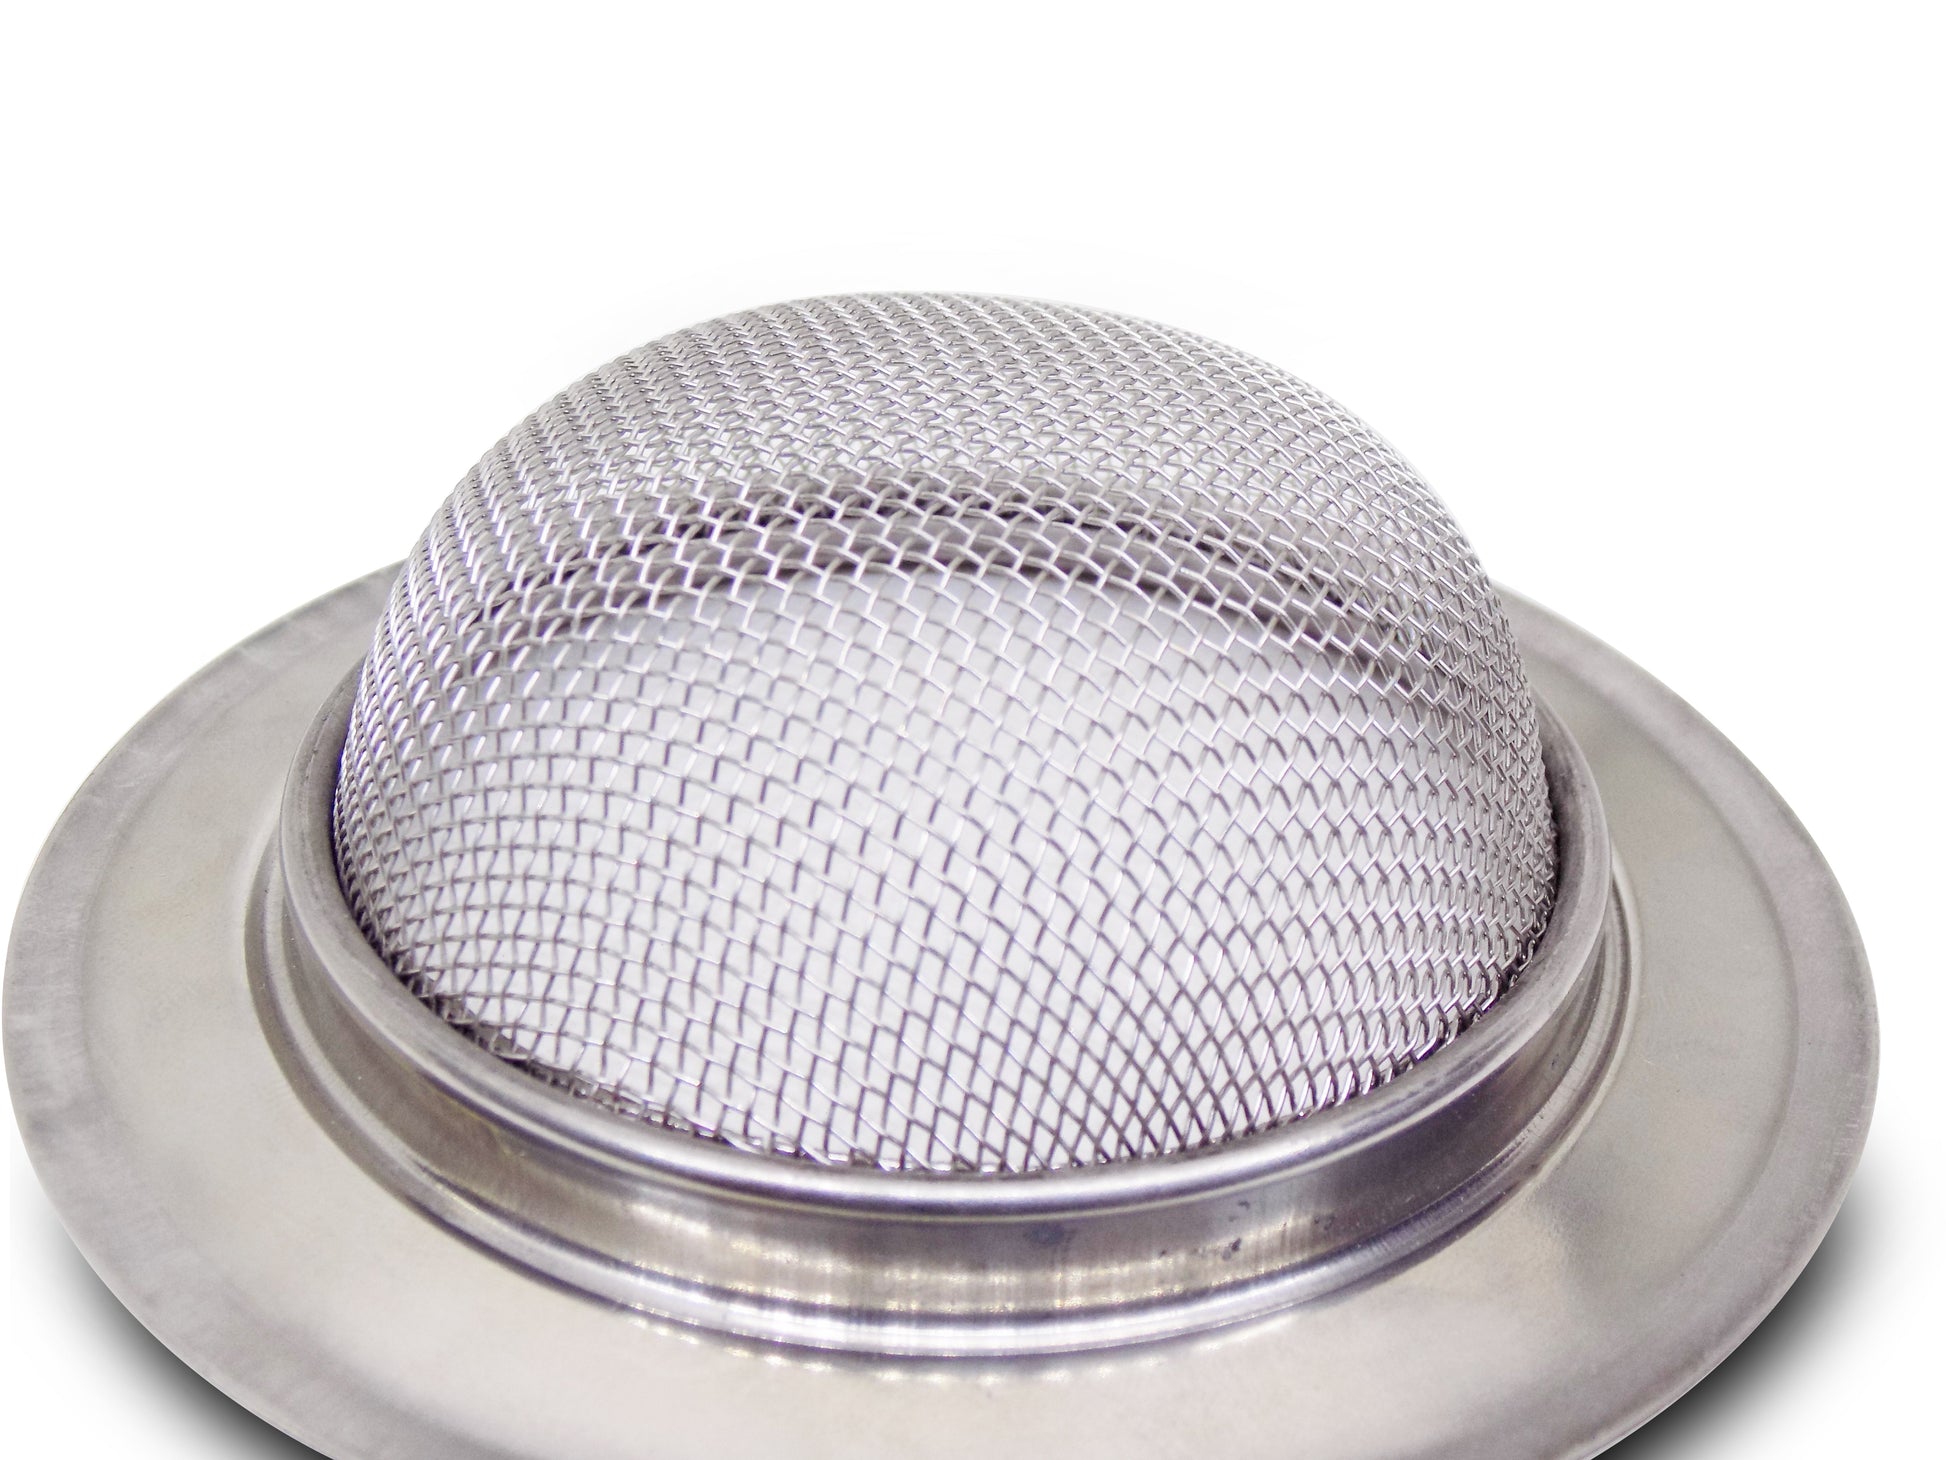 Small Stainless Steel Sink/Wash Basin Drain Strainer 